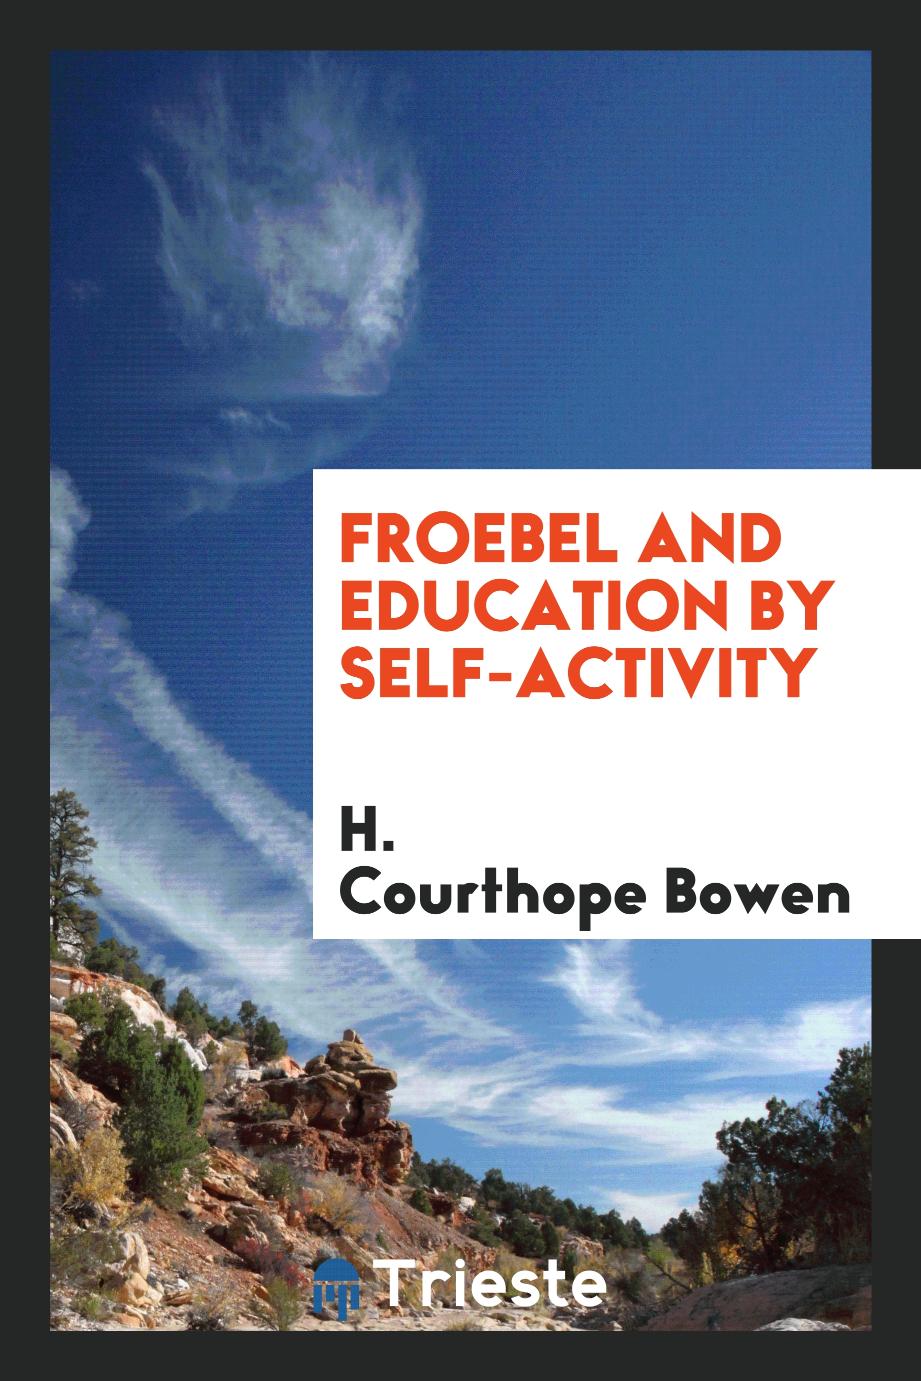 Froebel and Education by self-activity